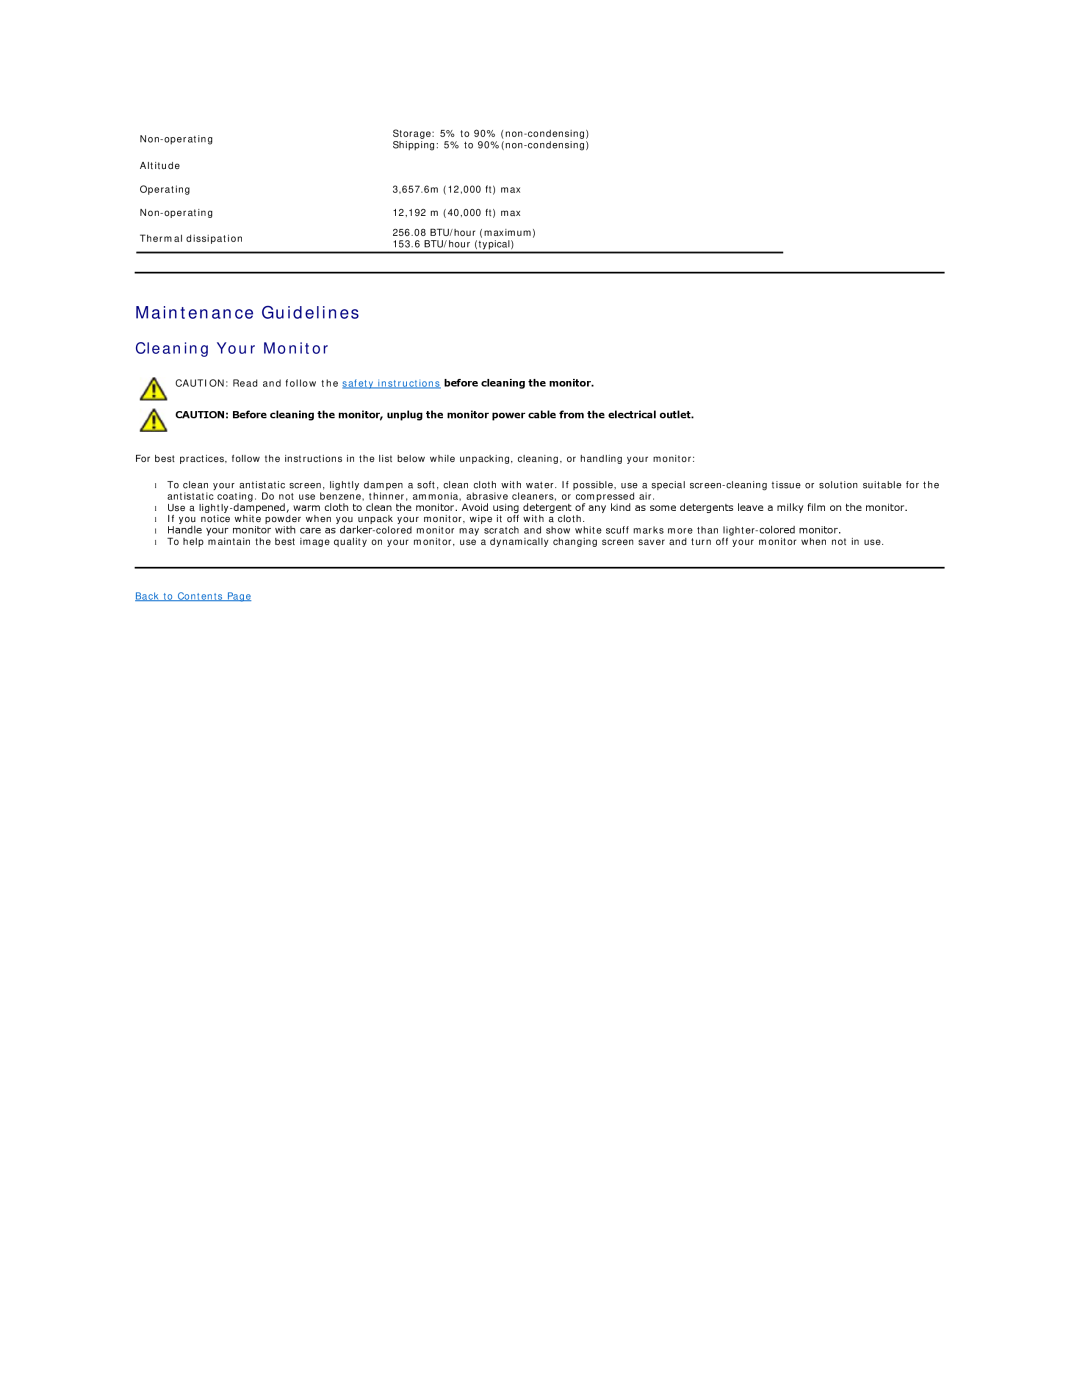 Dell 3309WFP appendix Maintenance Guidelines, Cleaning Your Monitor, Altitude, Thermal dissipation, Back to Contents Page 